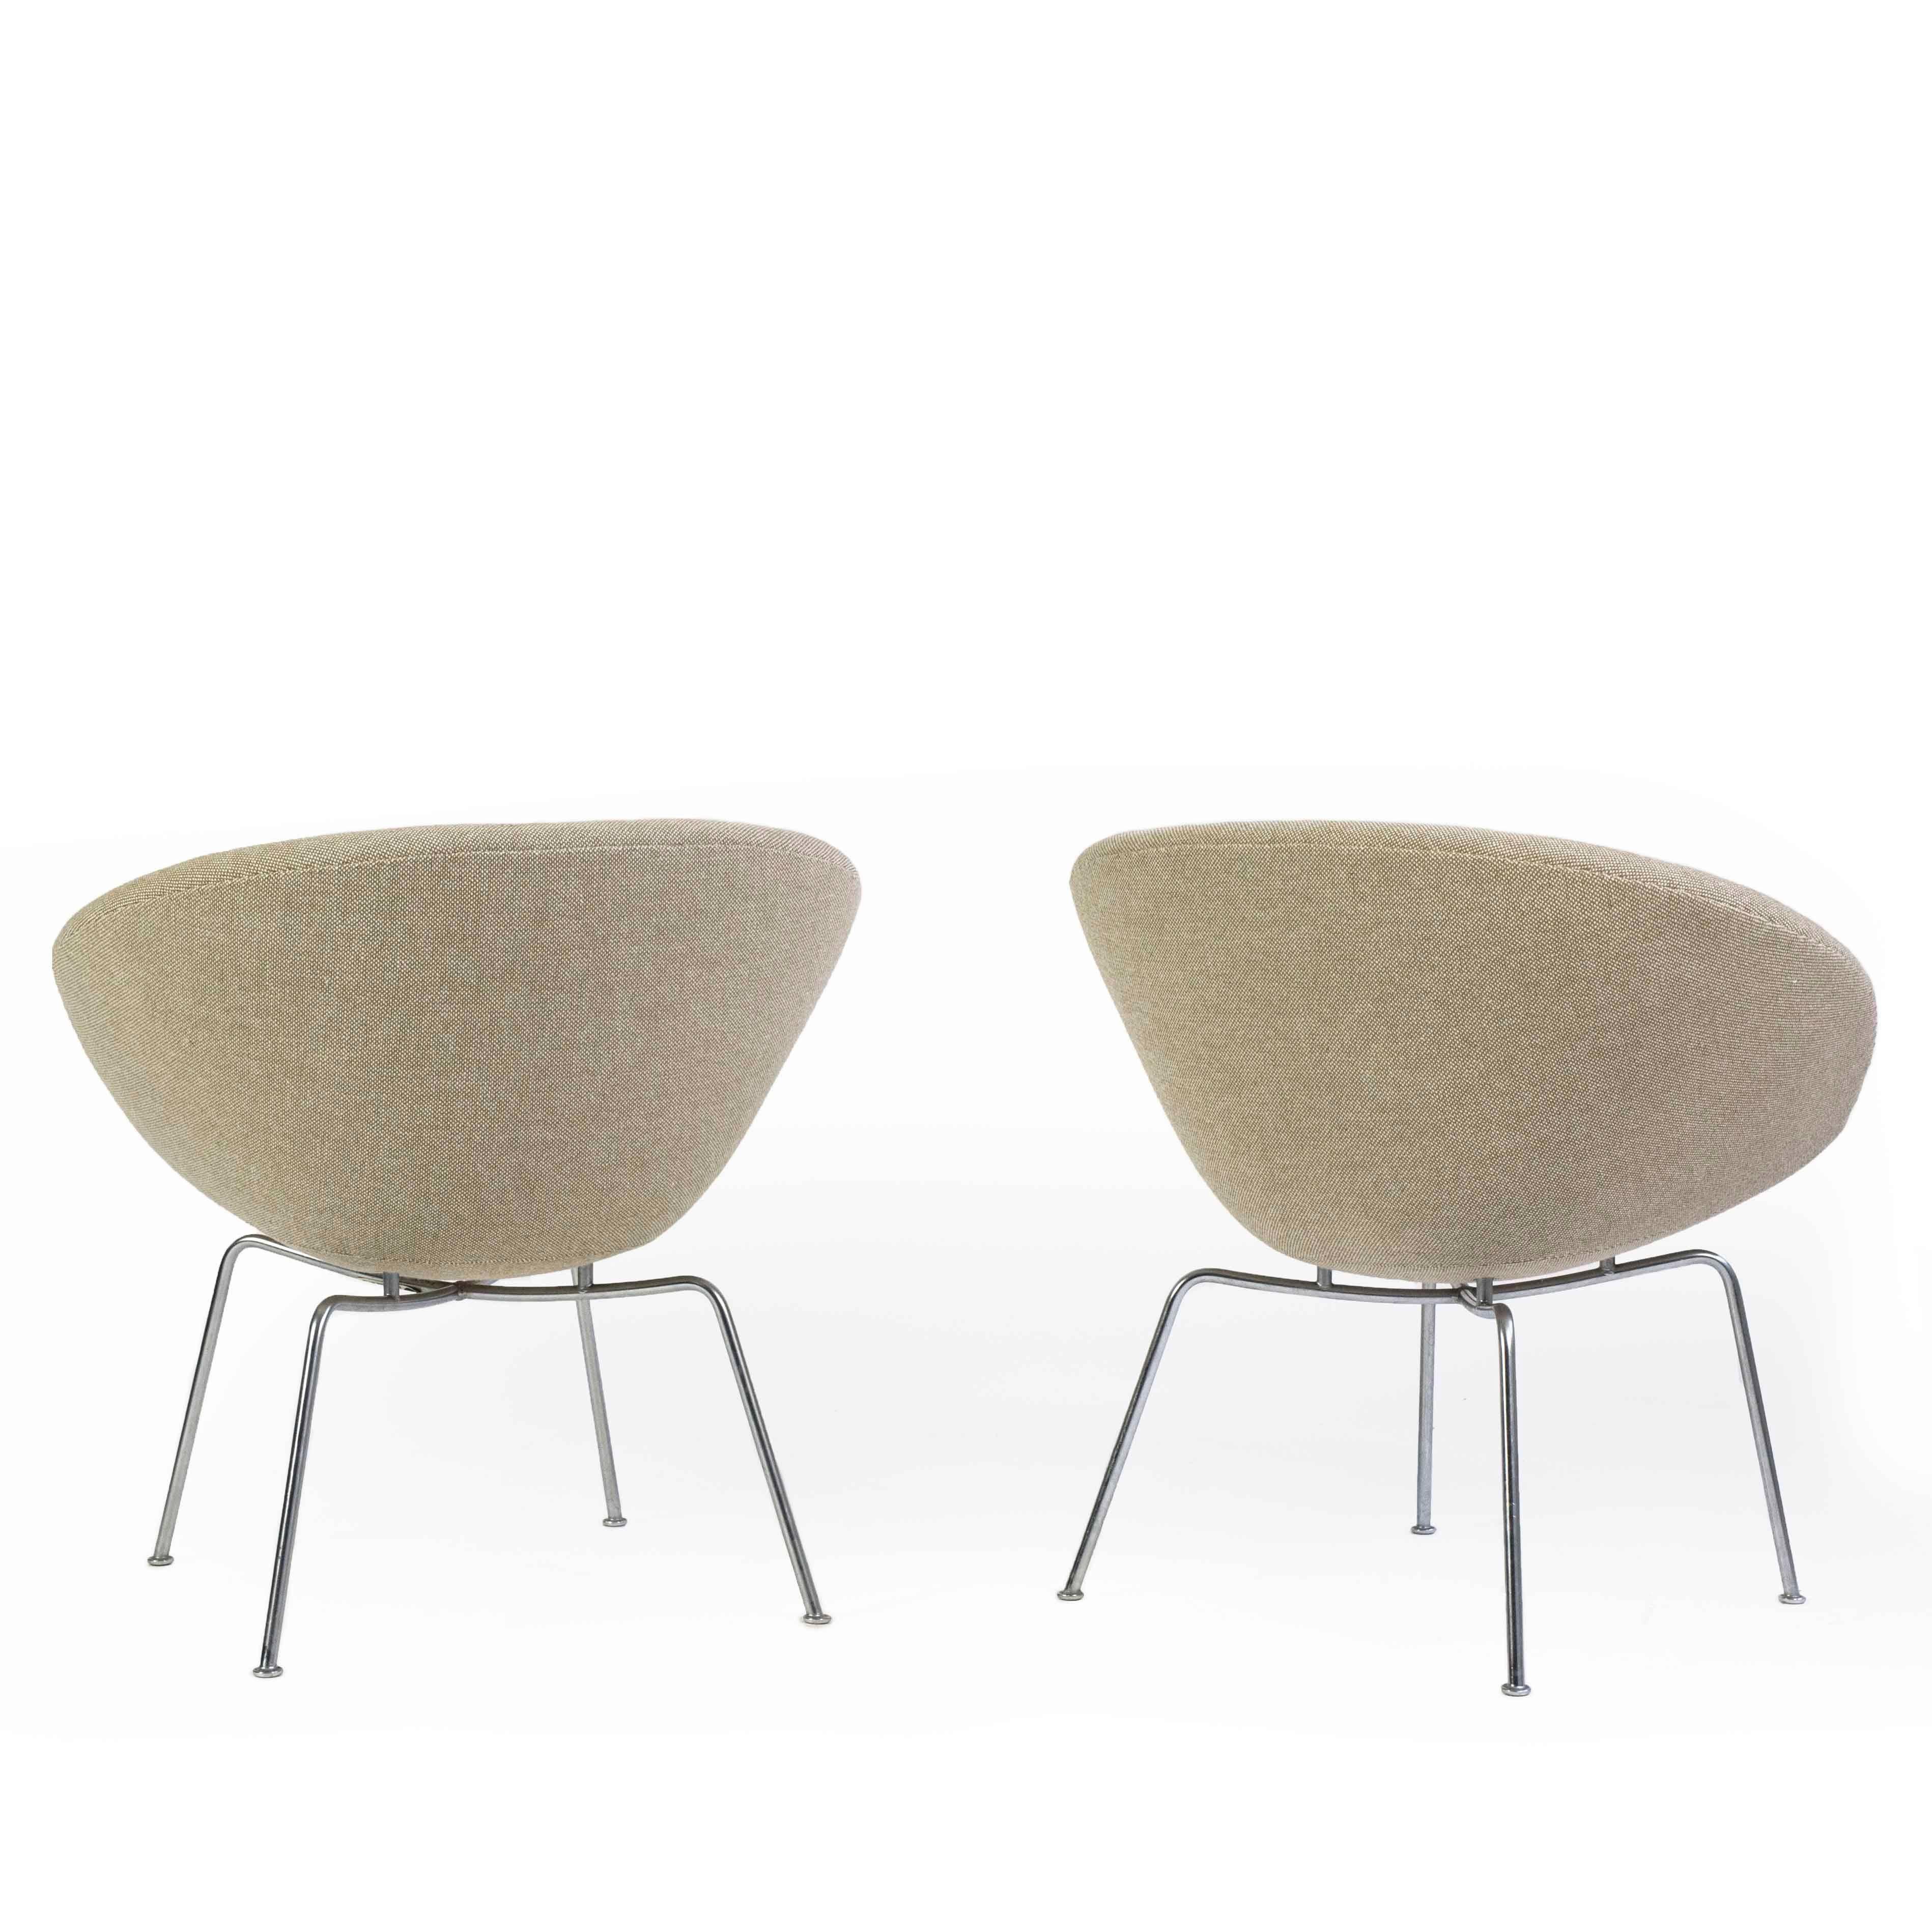 20th Century Pair of Arne Jacobsen Pot Chairs